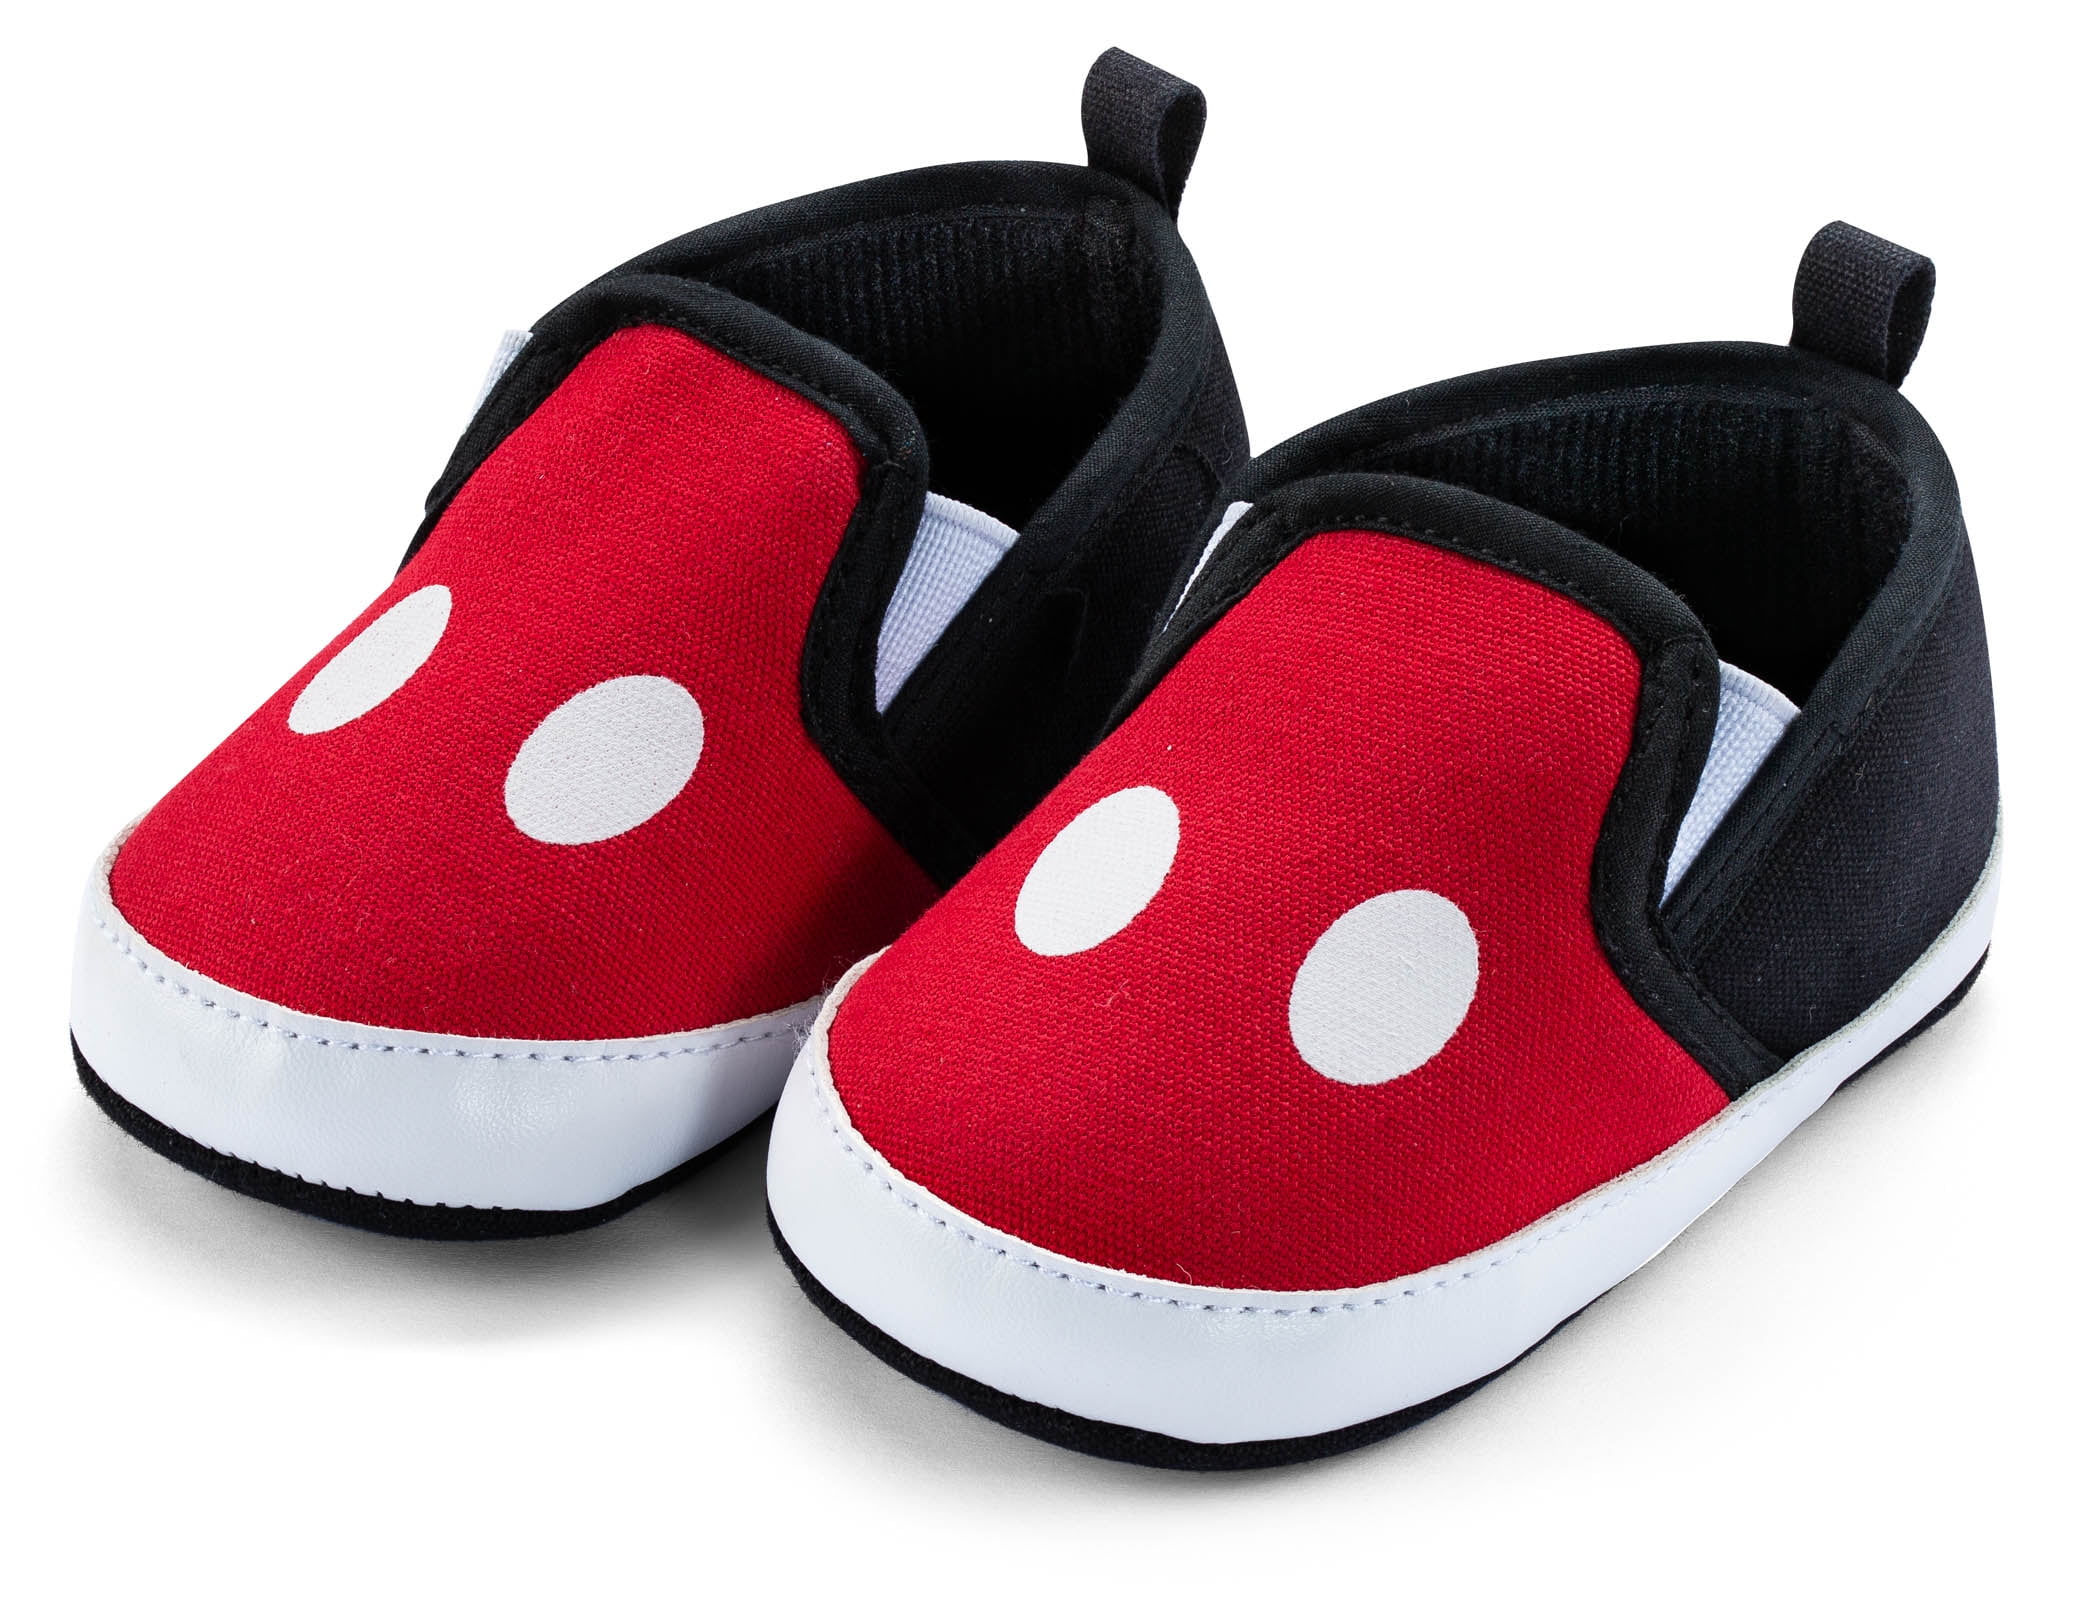 Disney Store Mickey Mouse Red Plush Baby Shoes Slippers Size 6 12 18 24 Months 